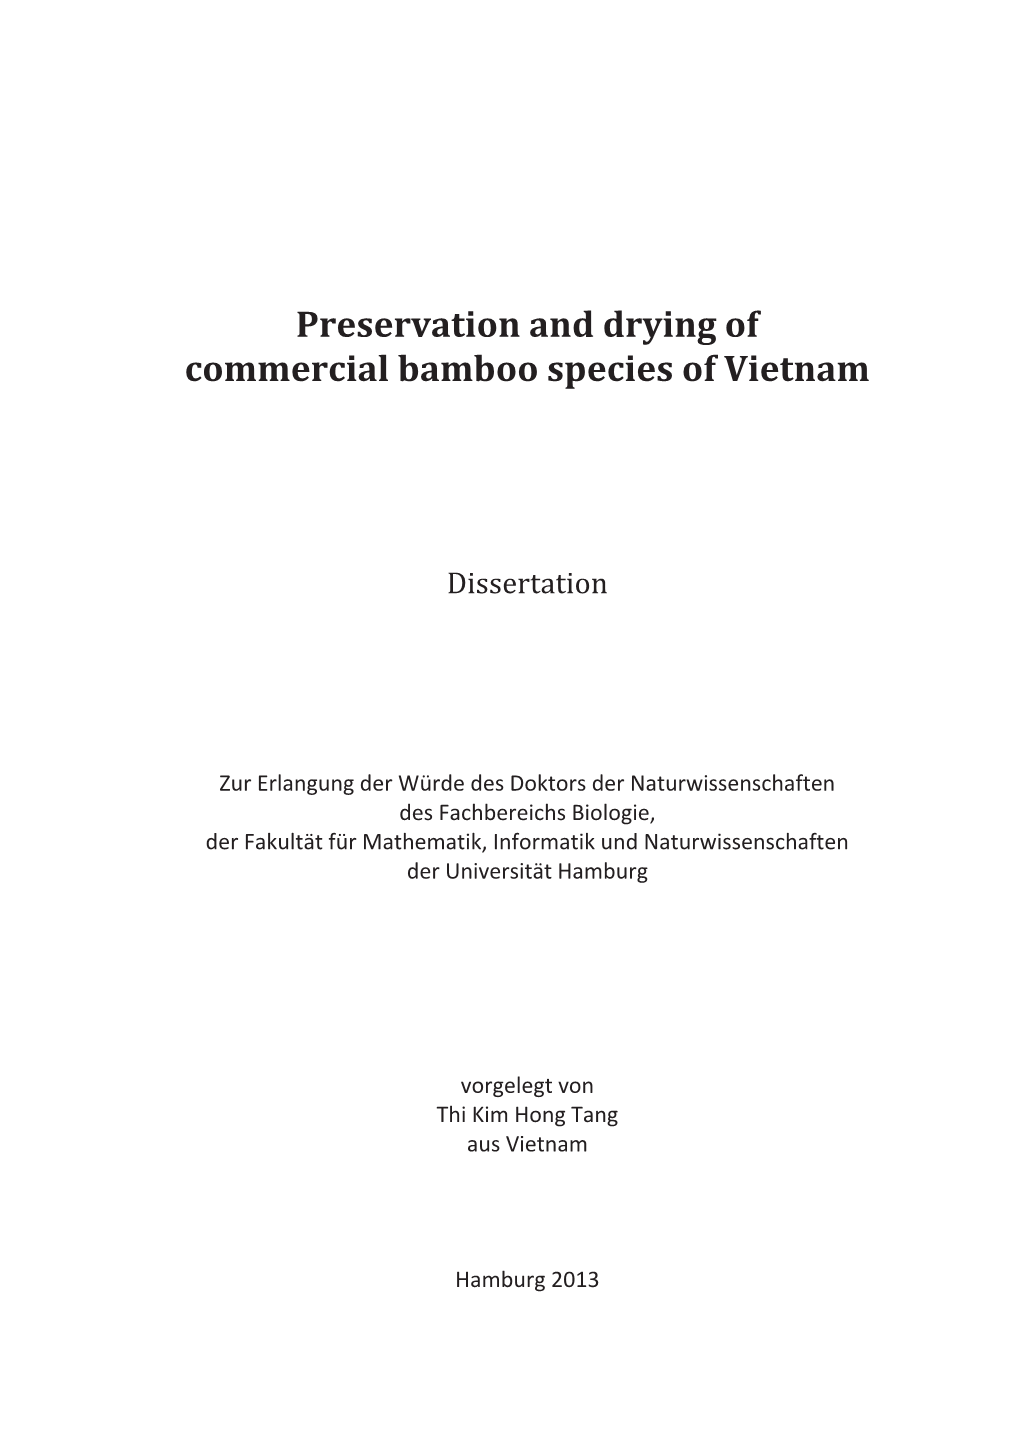 Investigation on Preservation and Drying of the Commercial Bamboo